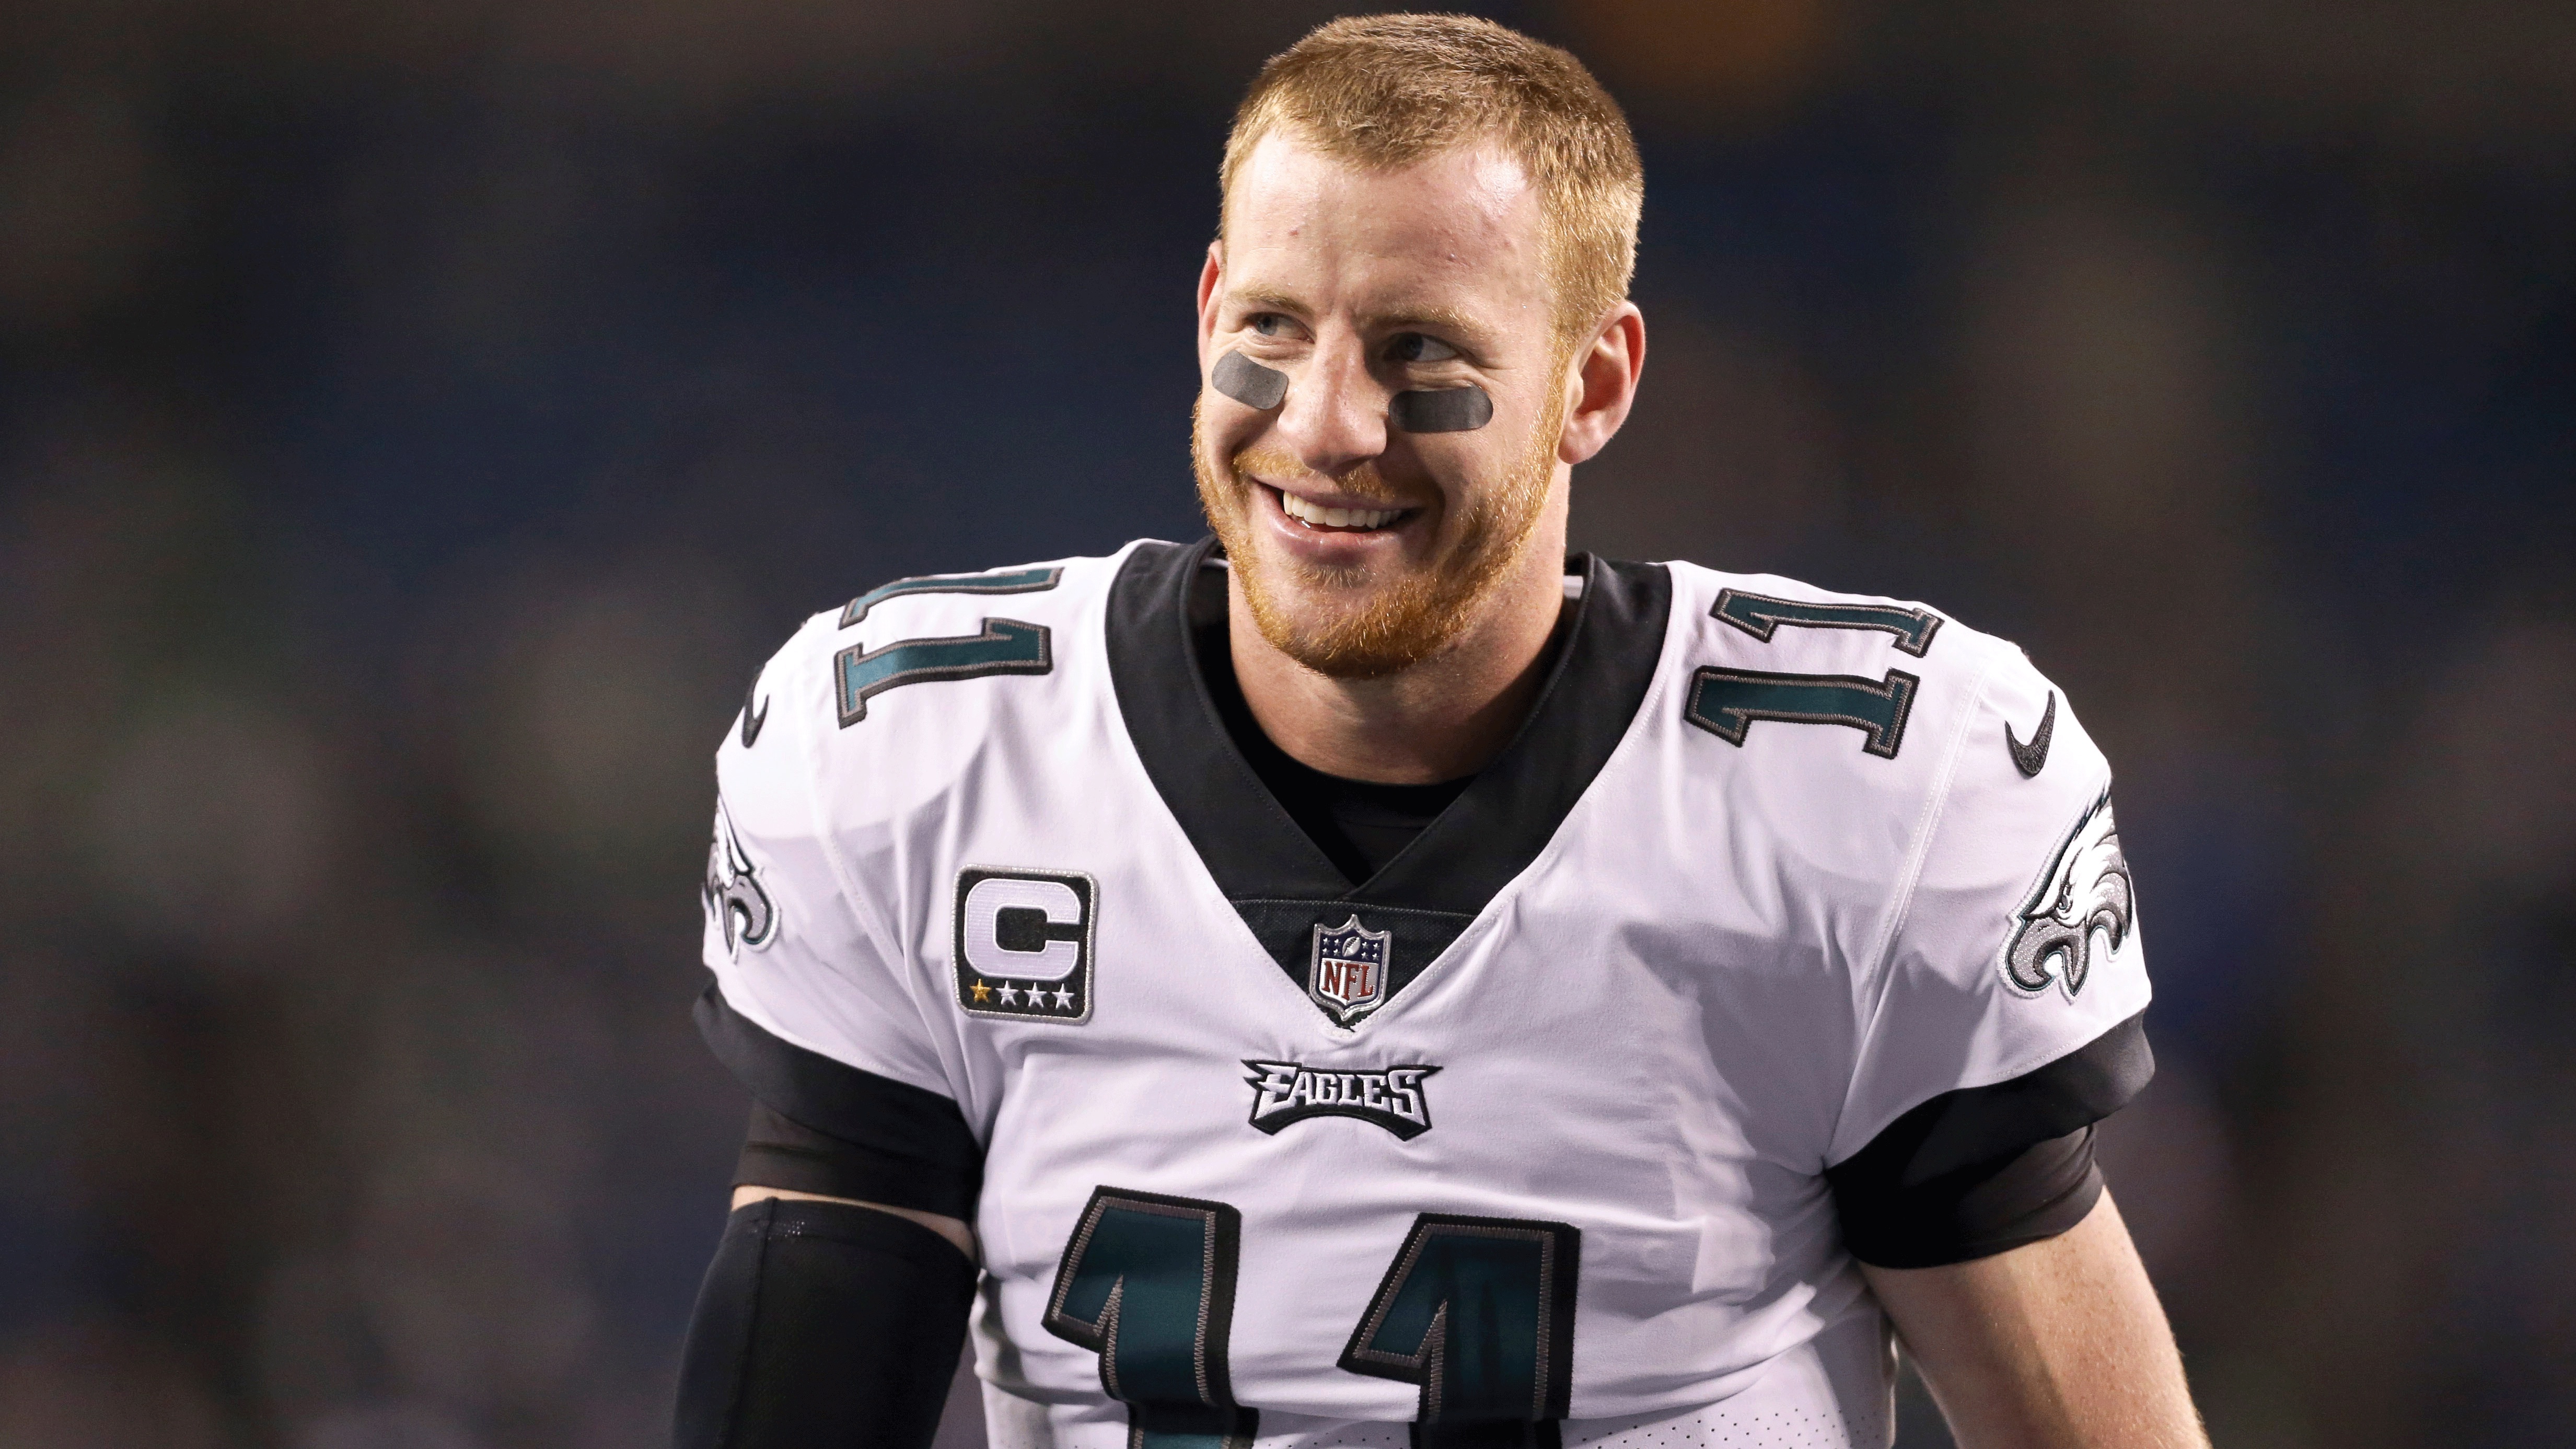 Carson Wentz and Lou Holtz to speak at Convocation this week | A Sea of Red